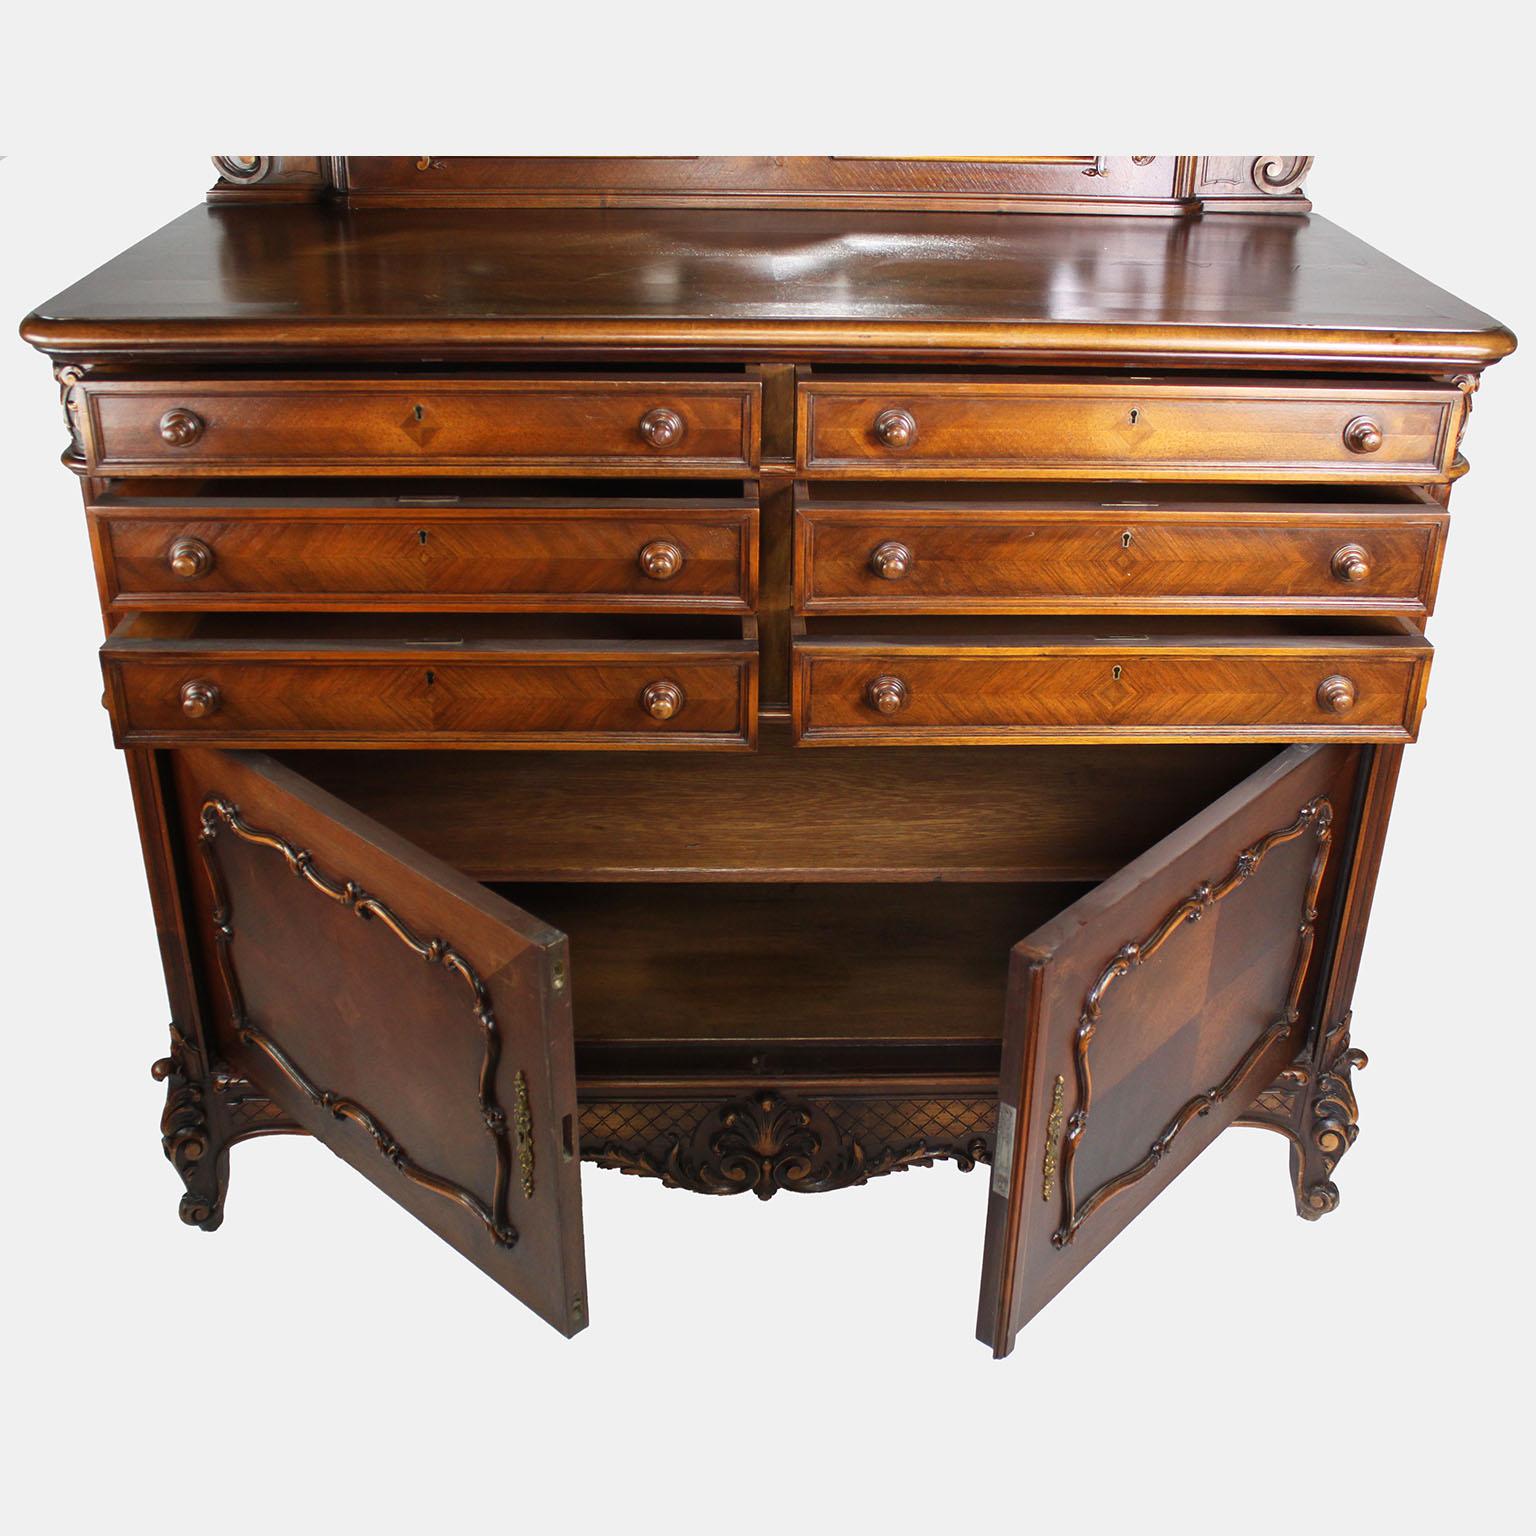 Mirror Country French 19th/20th Century Louis XV Provençal Style Carved Walnut Vanity For Sale